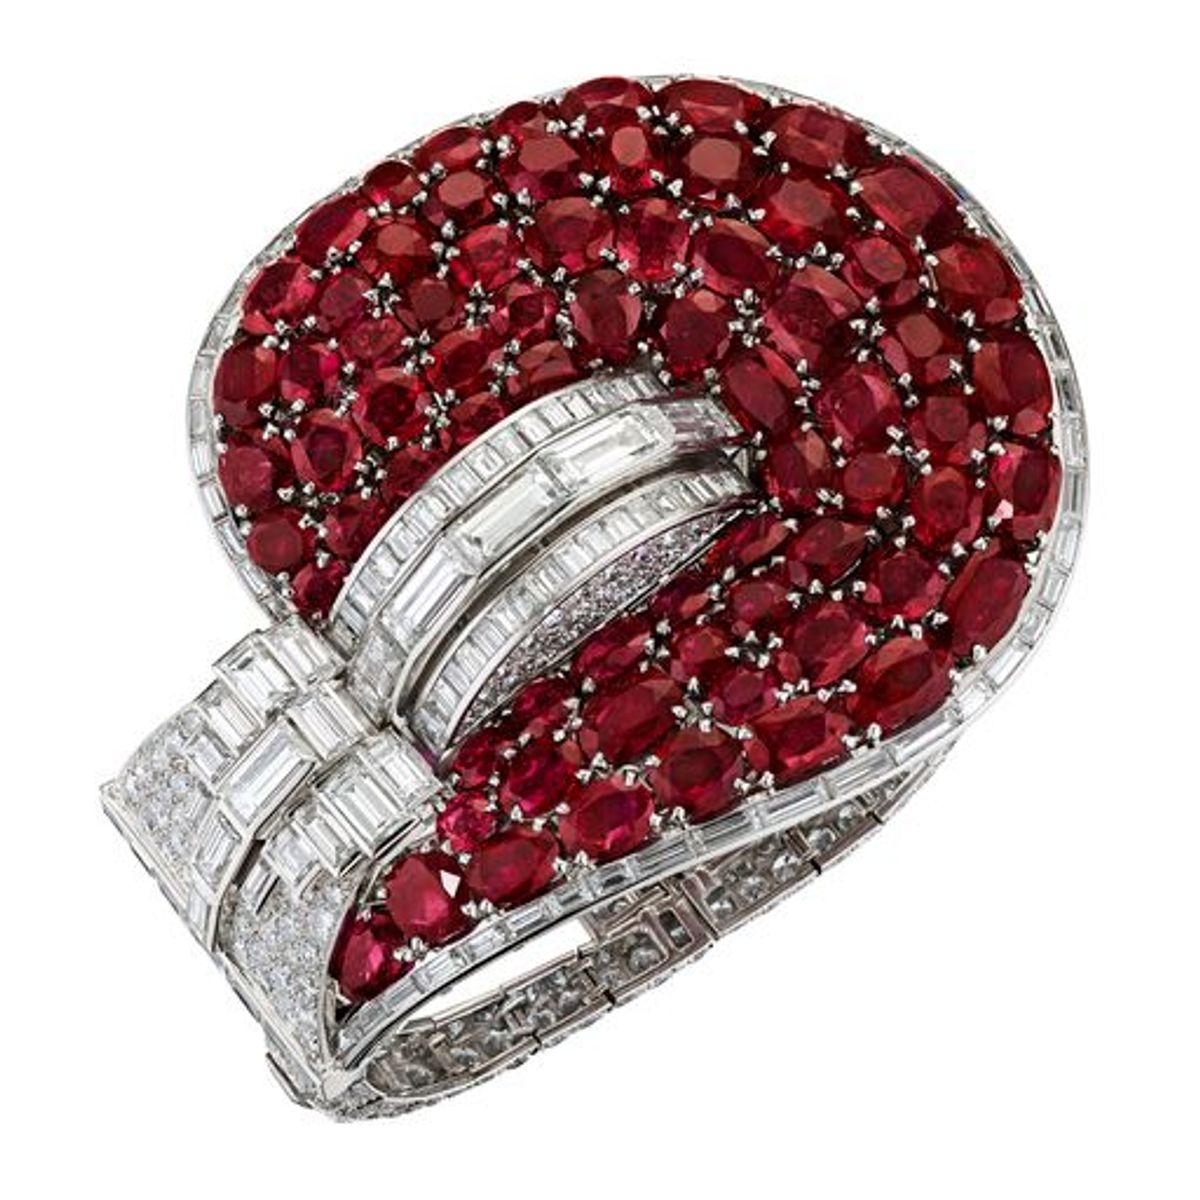 Marlene Dietrich is the former owner of the “Jarretière” bracelet up for sale in June Courtesy Christie's